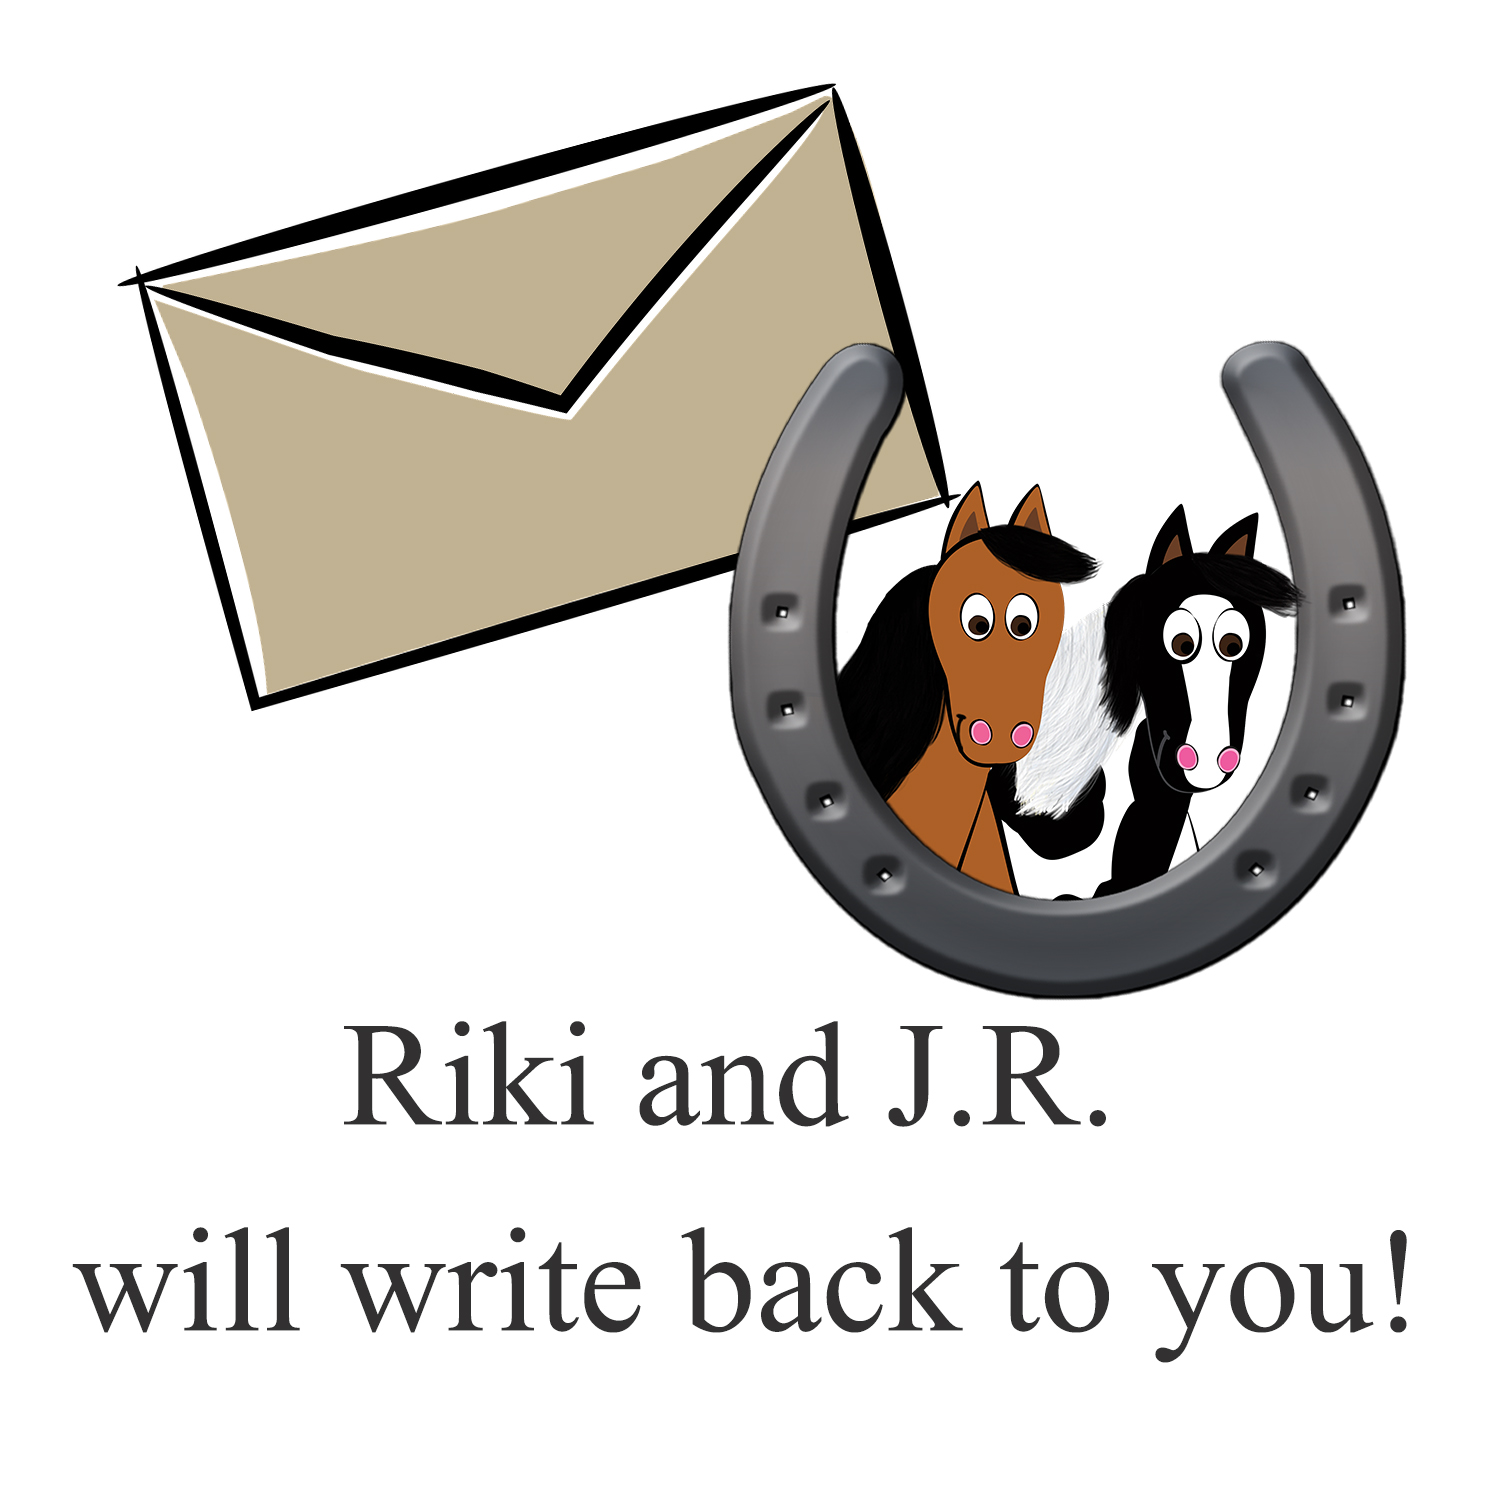 Riki and J.R will write back to you